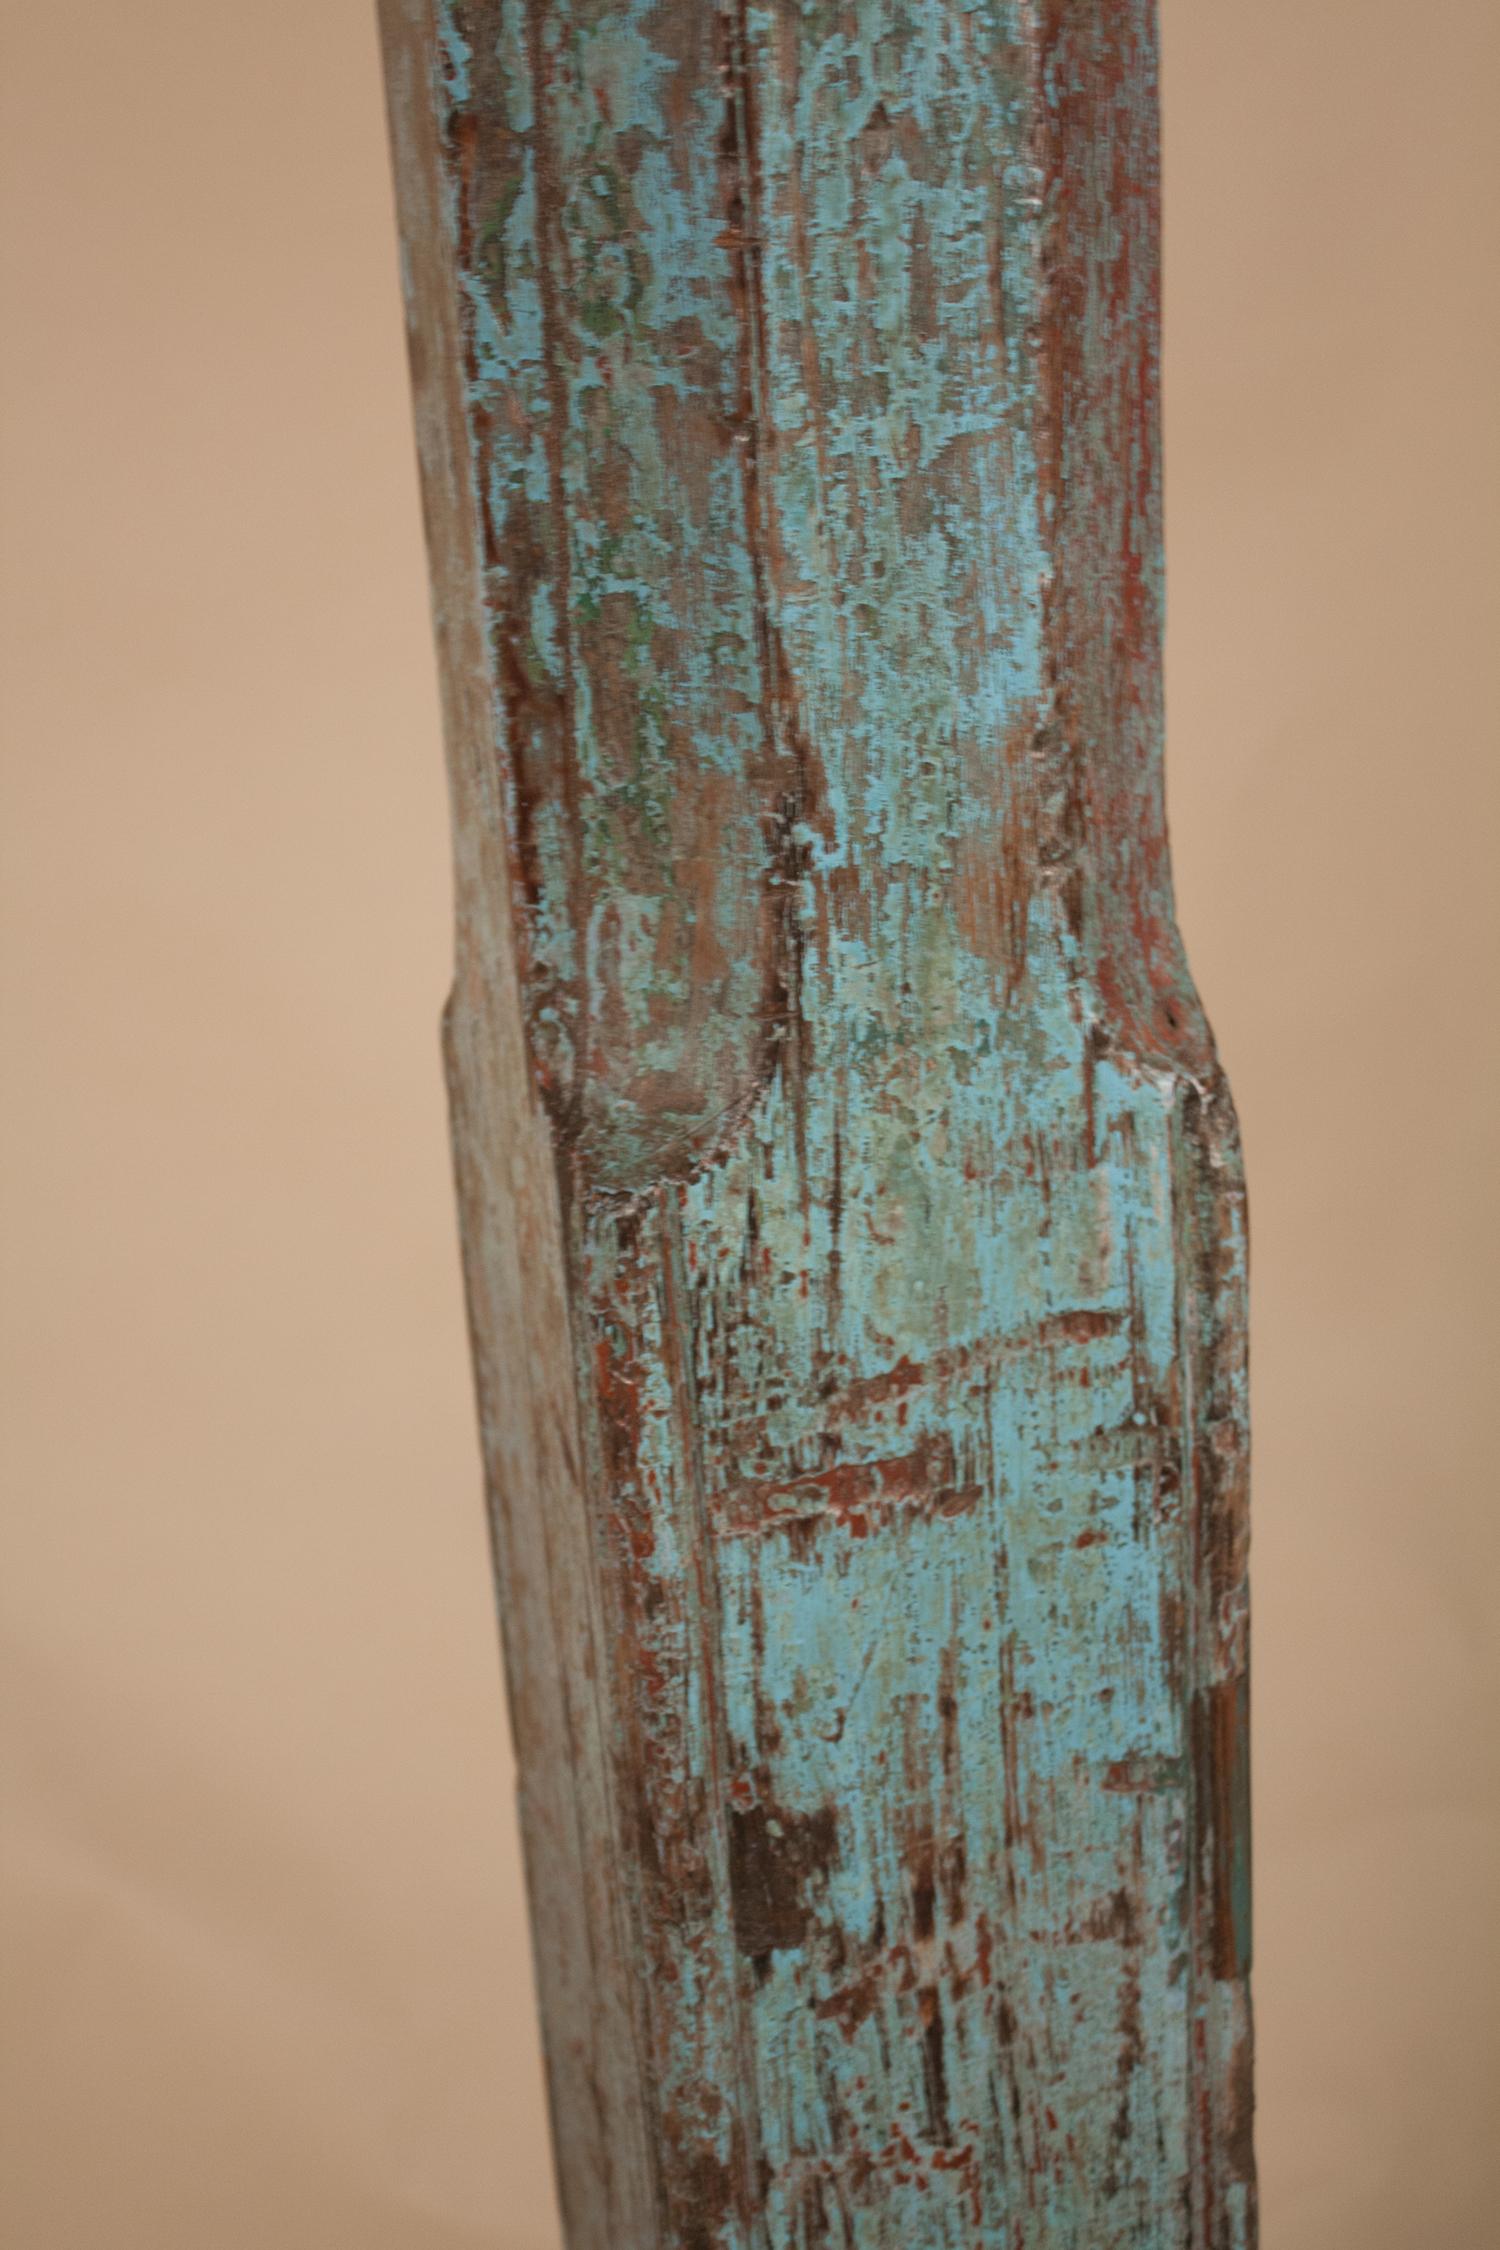 20th Century Pair of Painted, Carved Teak Wood Columns from Gujarat, India